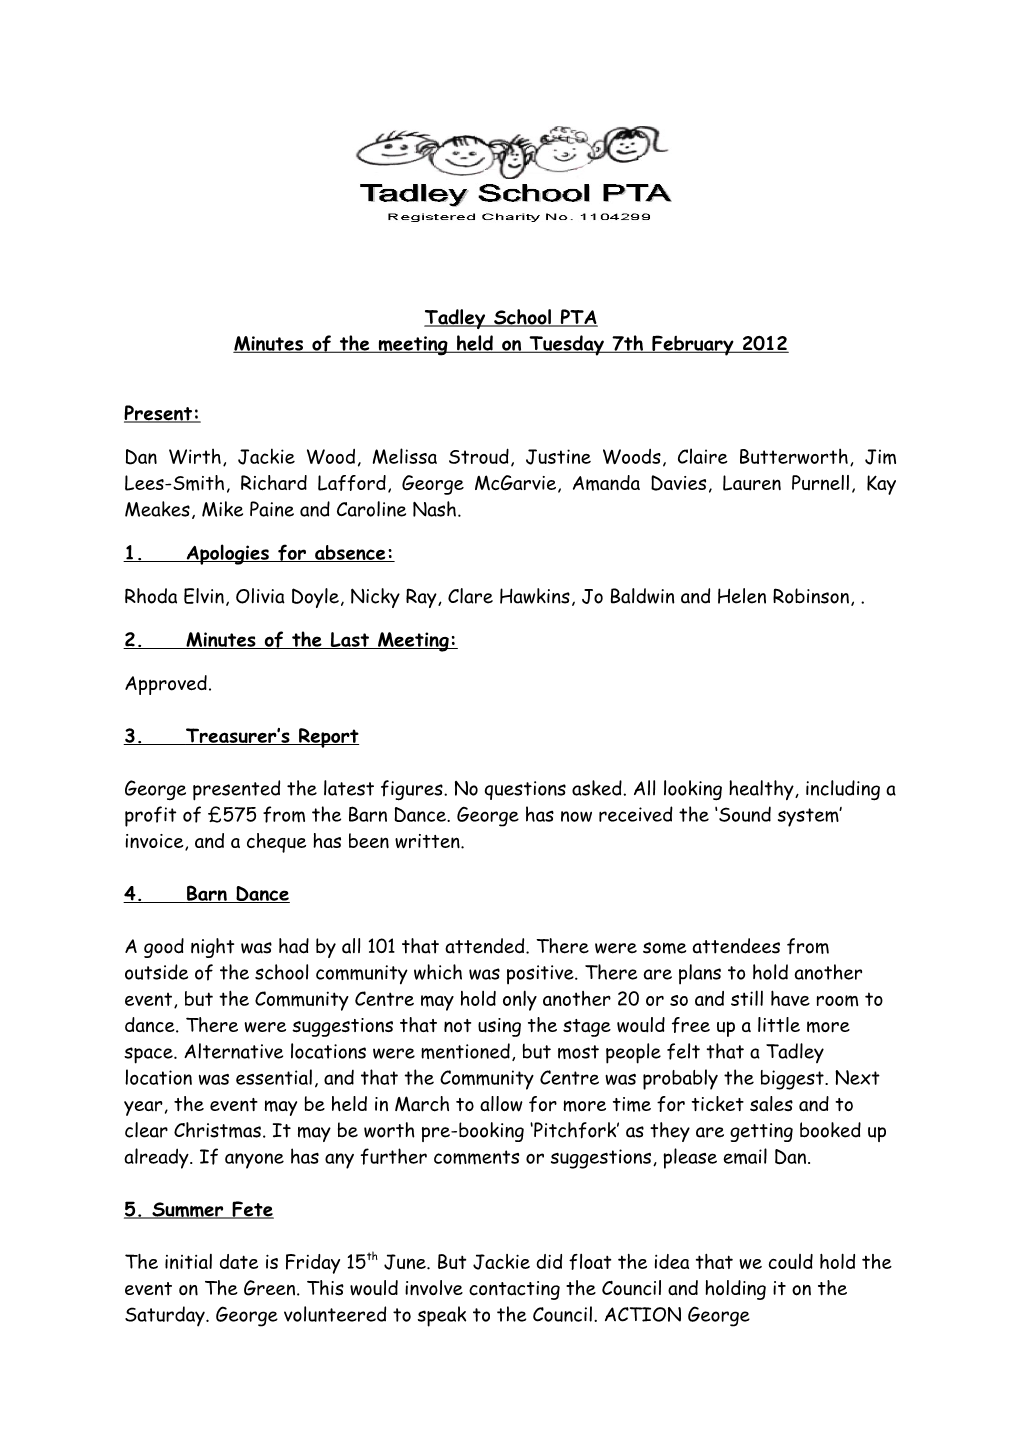 Minutes of the Meeting Held on Tuesday 7Th February 2012